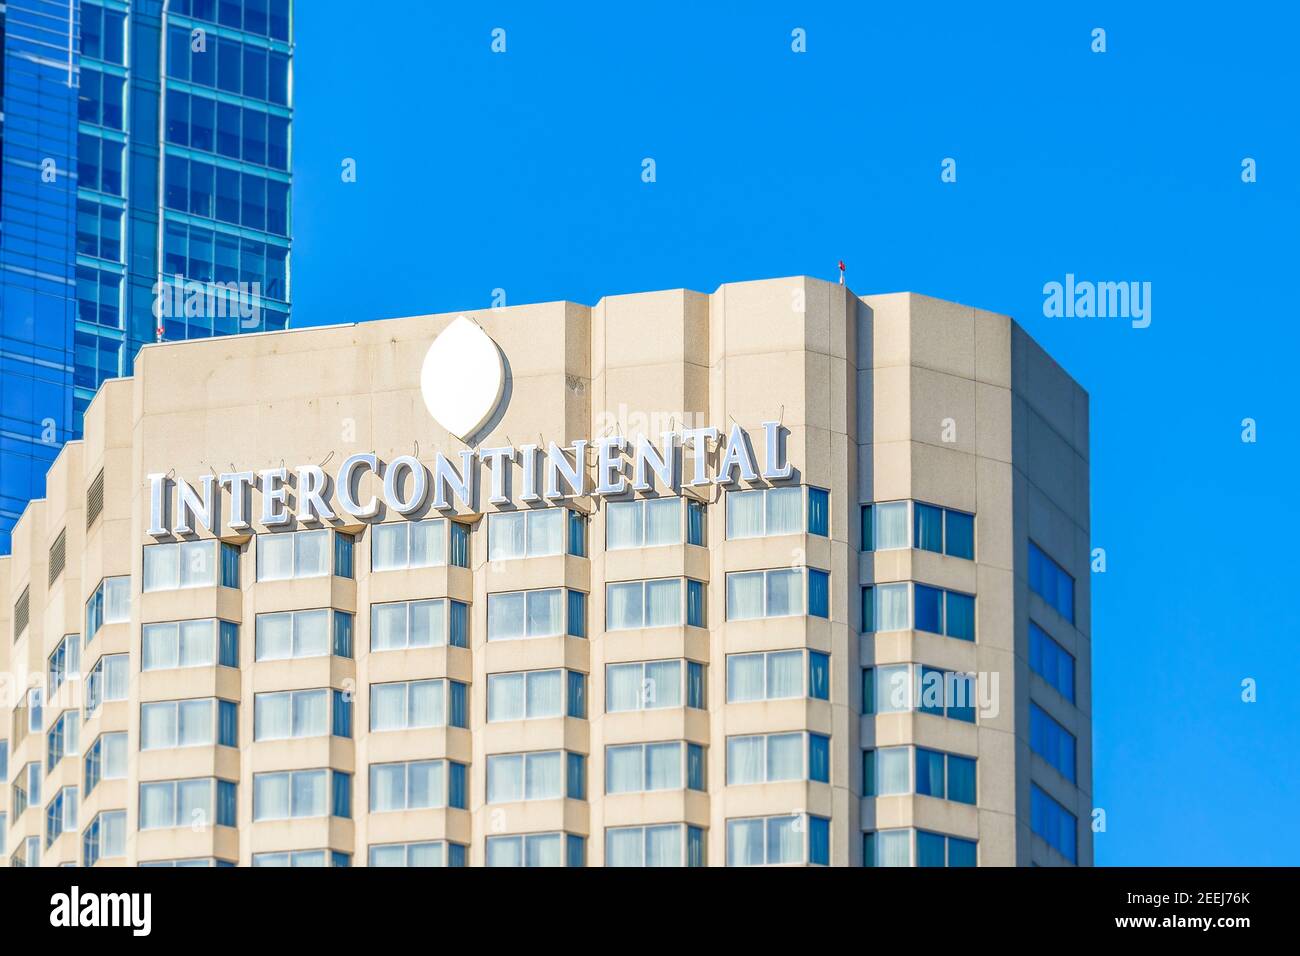 Intercontinental hotel facade: The hotel is known for its luxurious interior design and the staff's attention to detail. Stock Photo